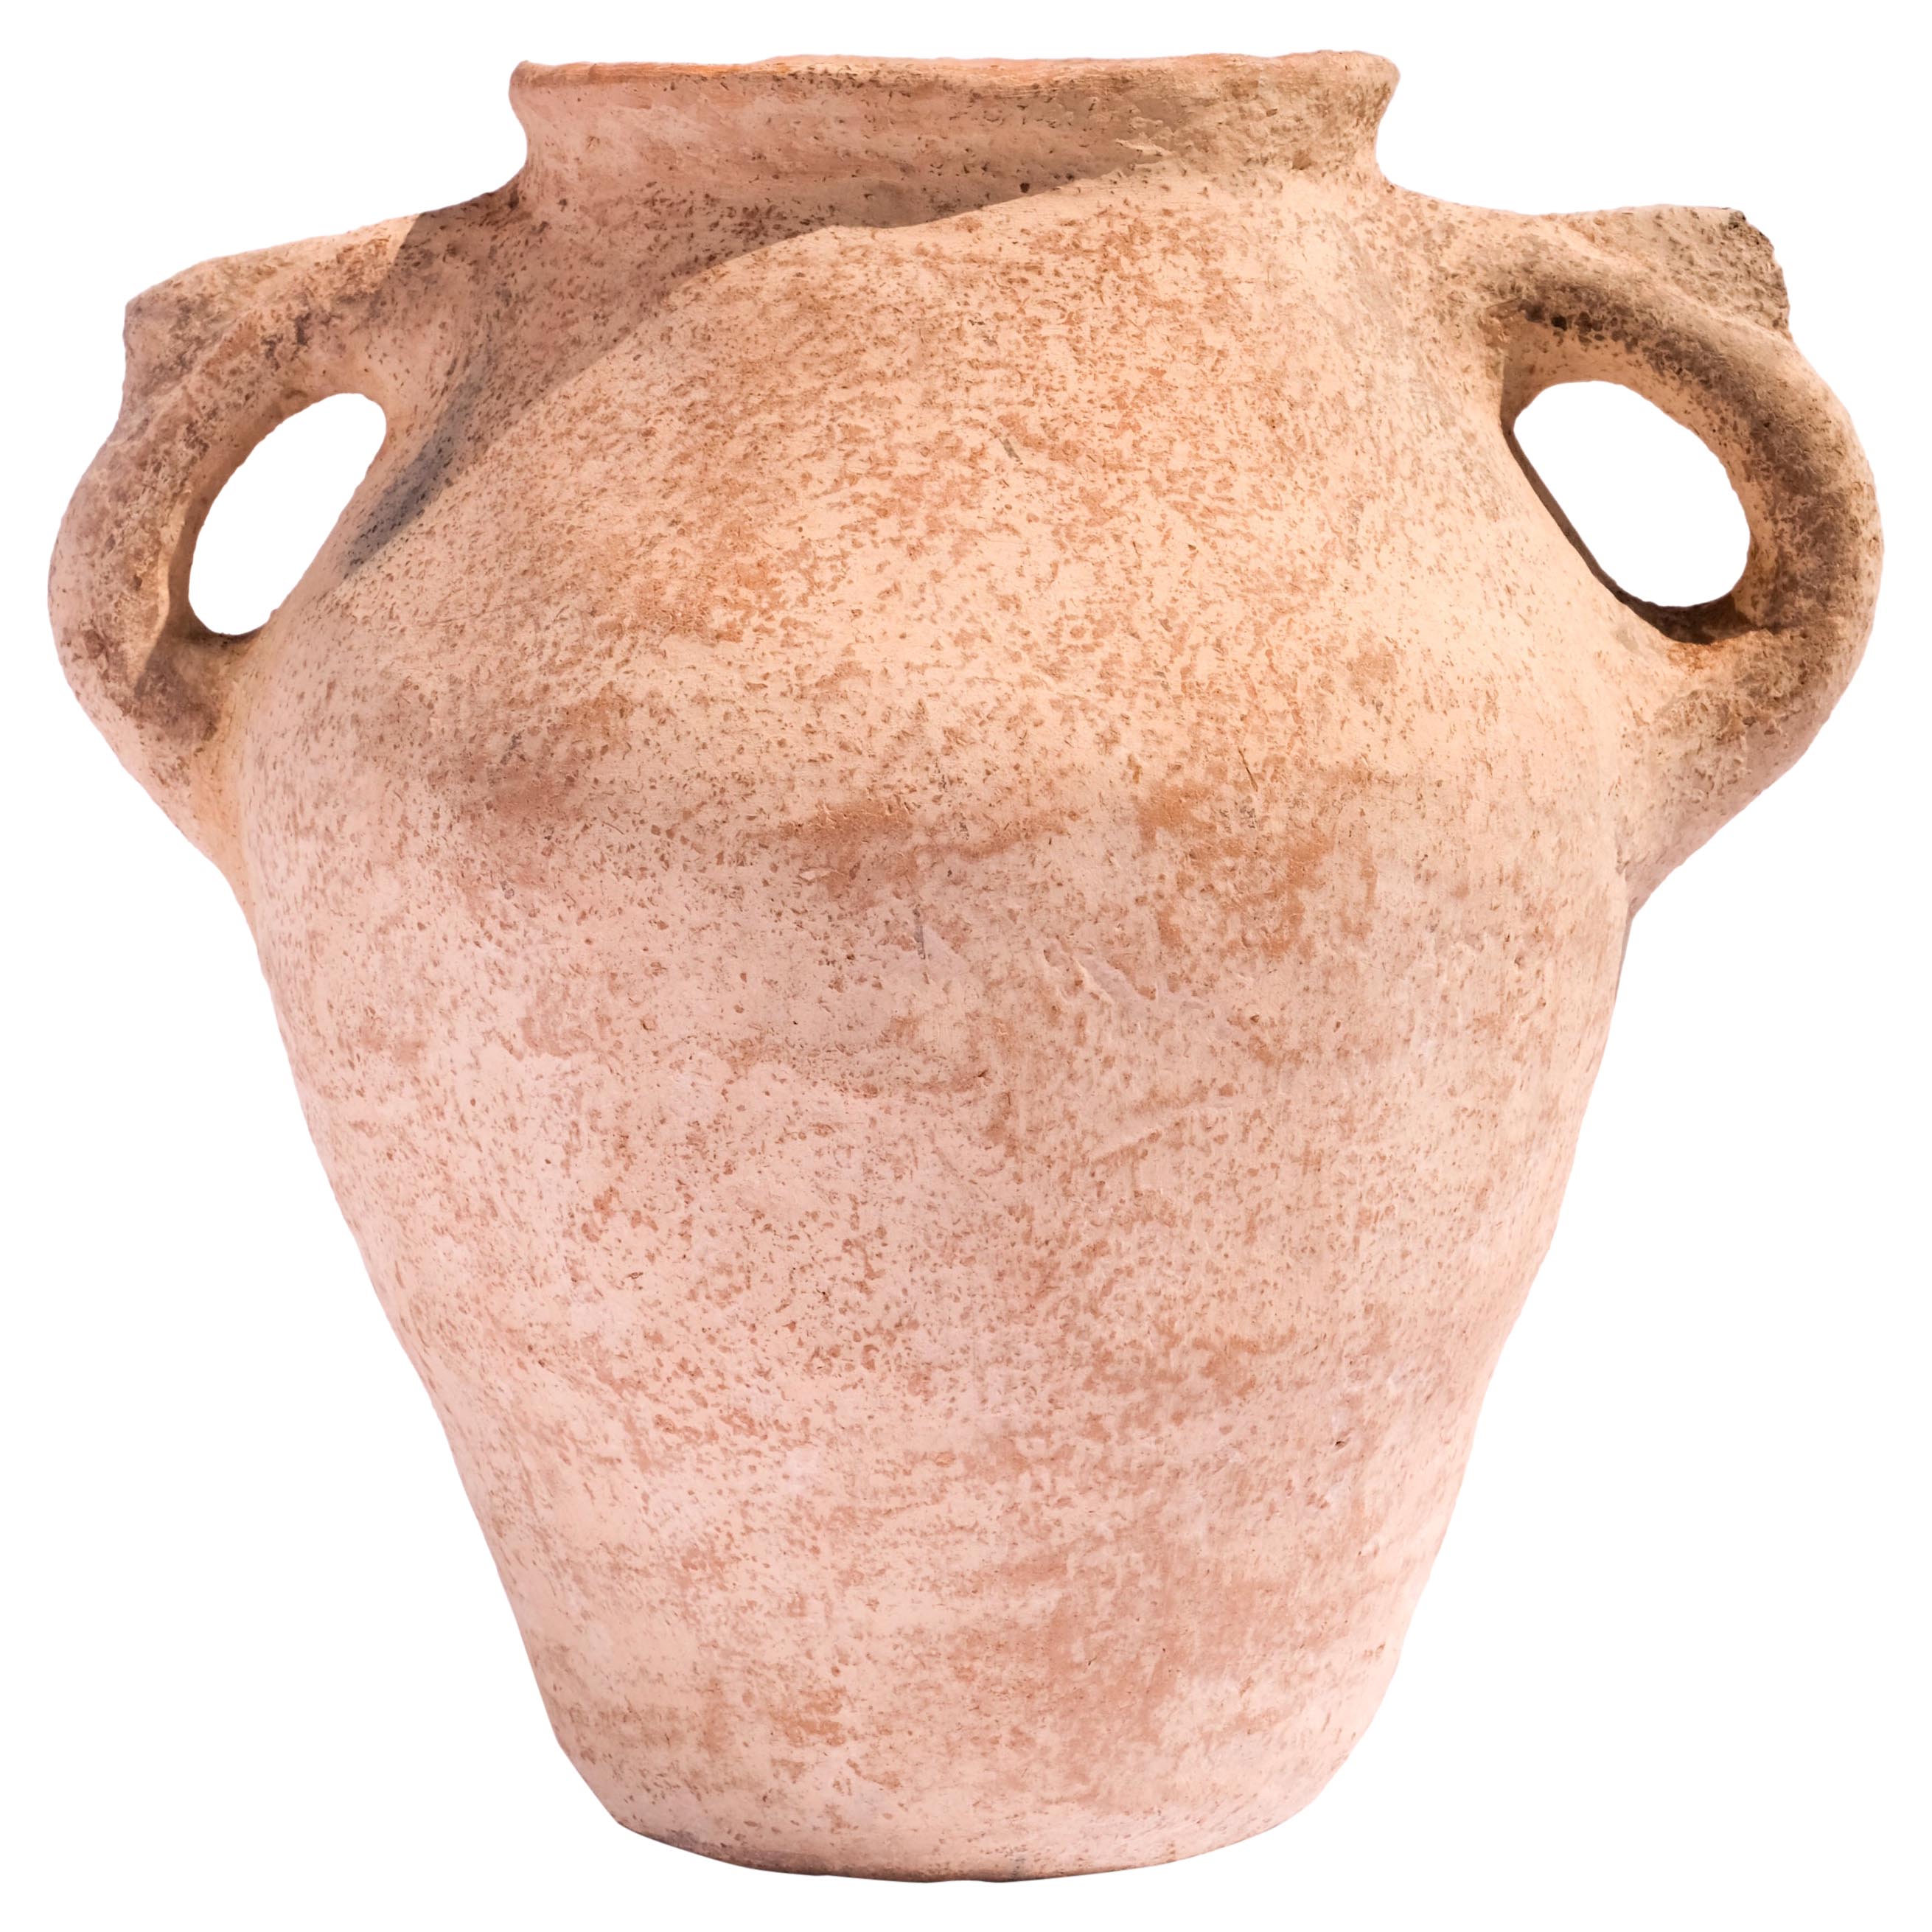 Khabia Grid Freckles Terracotta Jar Made of Clay, Handcrafted by the Potter Raja